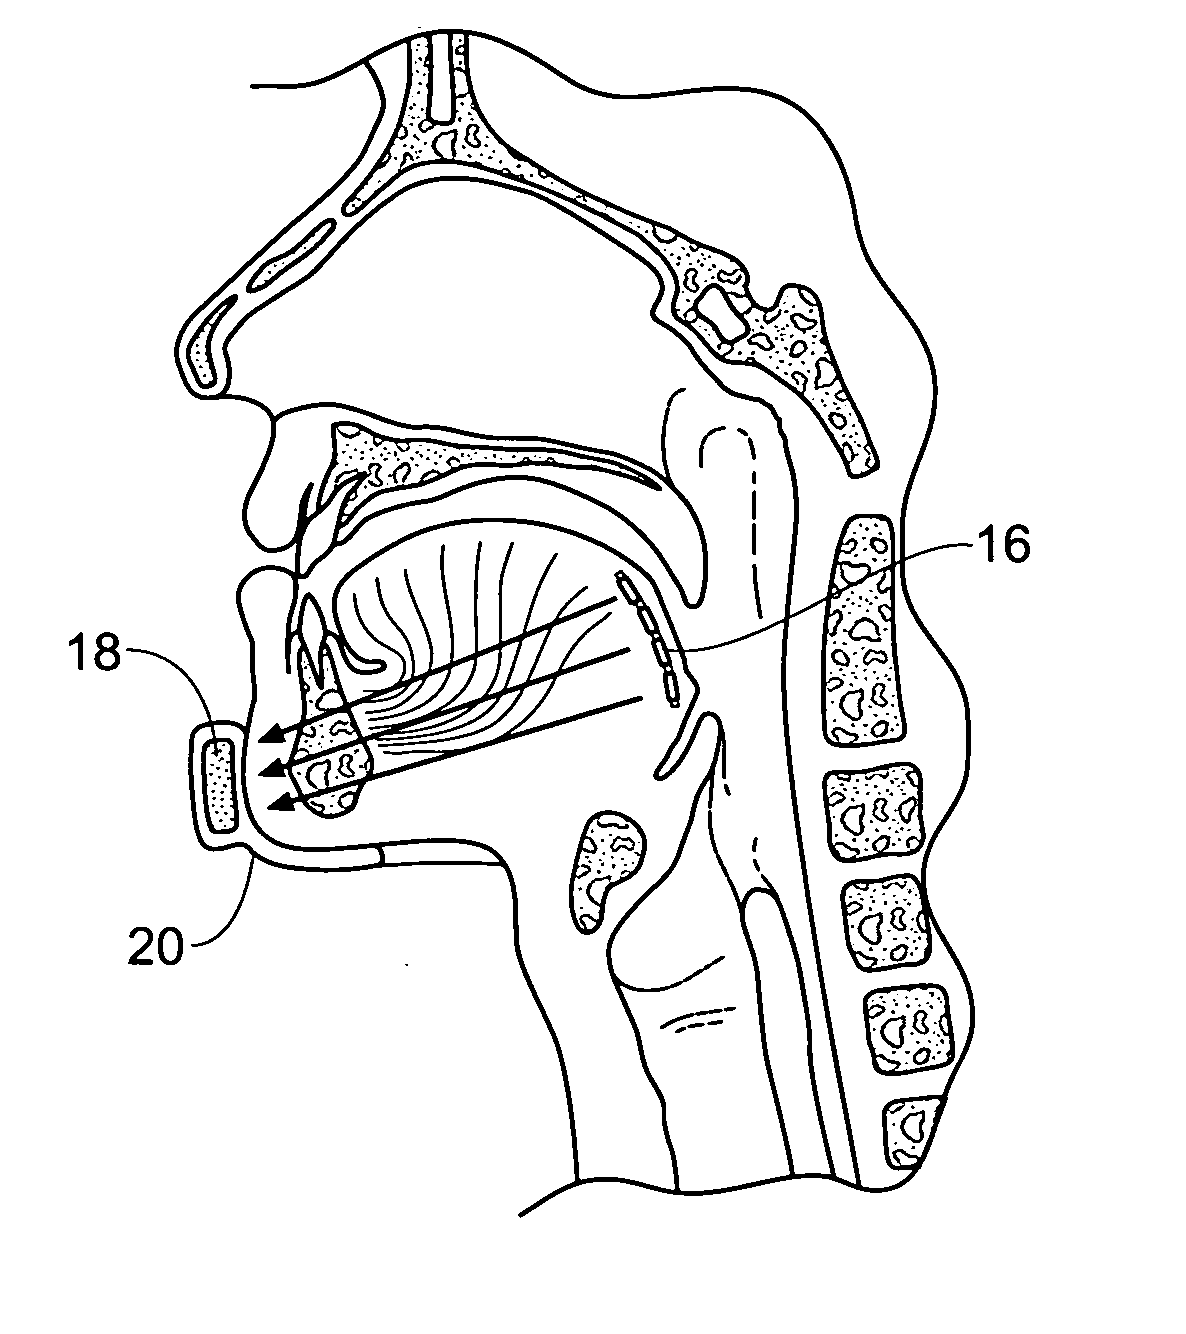 Devices, systems, and methods for stabilization or fixation of magnetic force devices used in or on a body